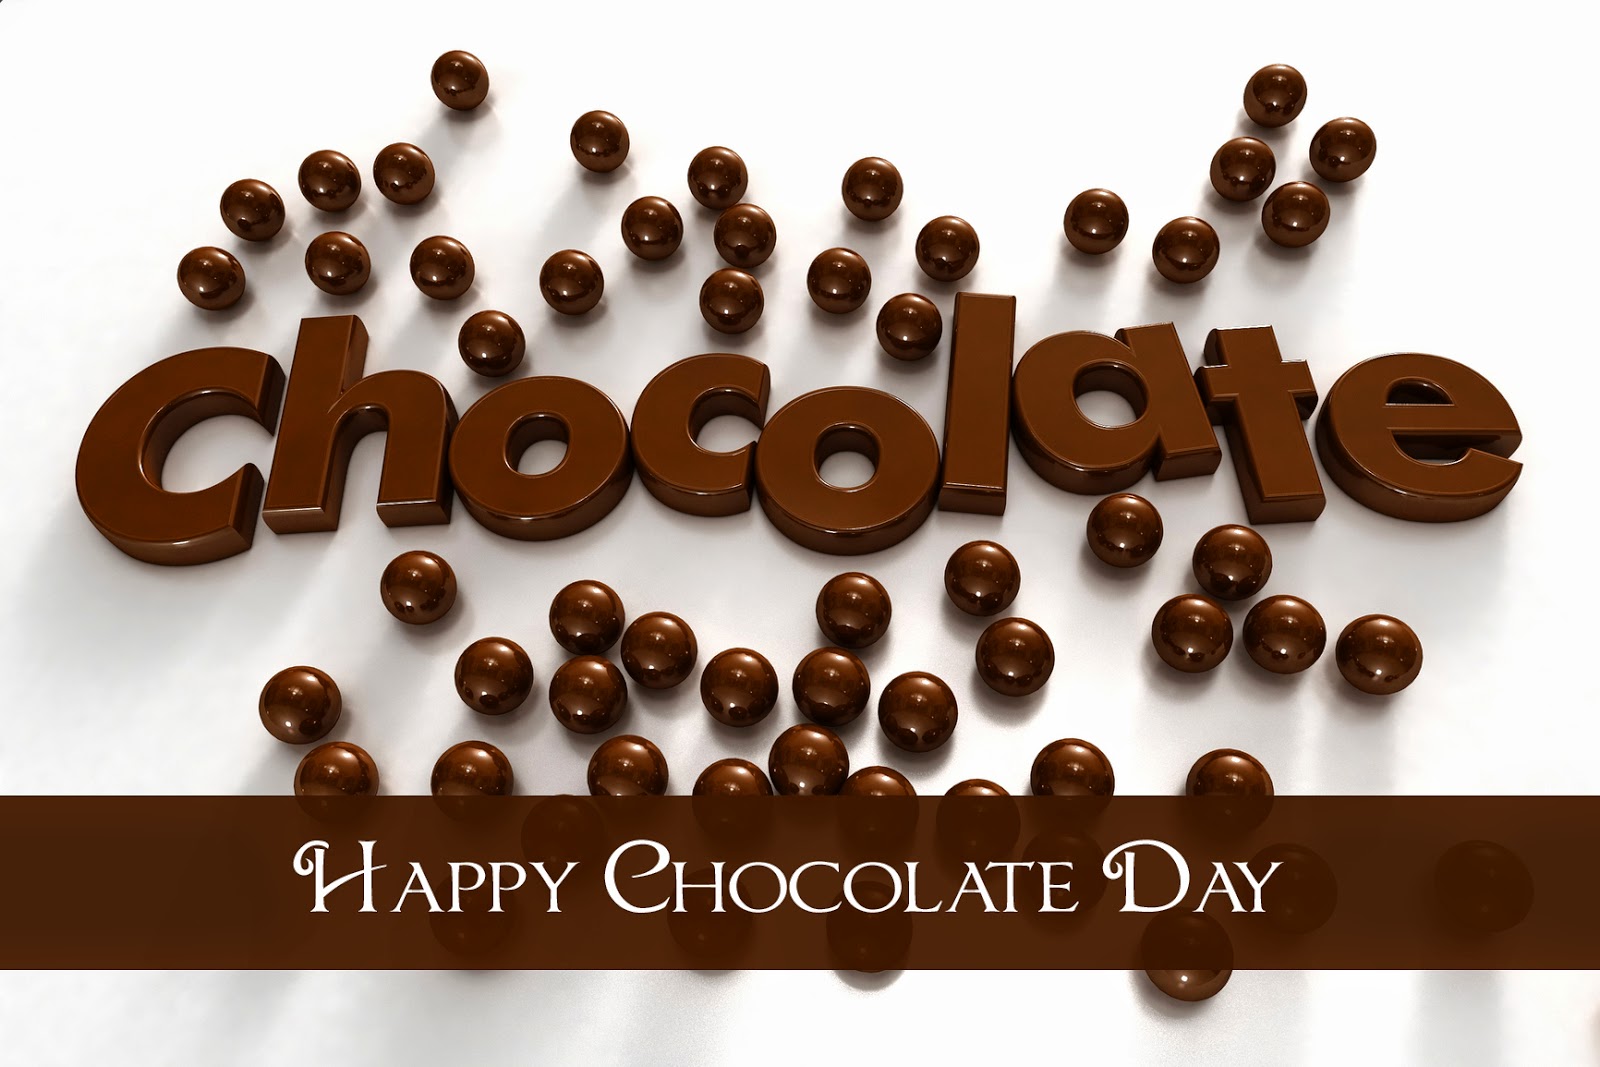 National Chocolate Day 2018 - HD Wallpaper 